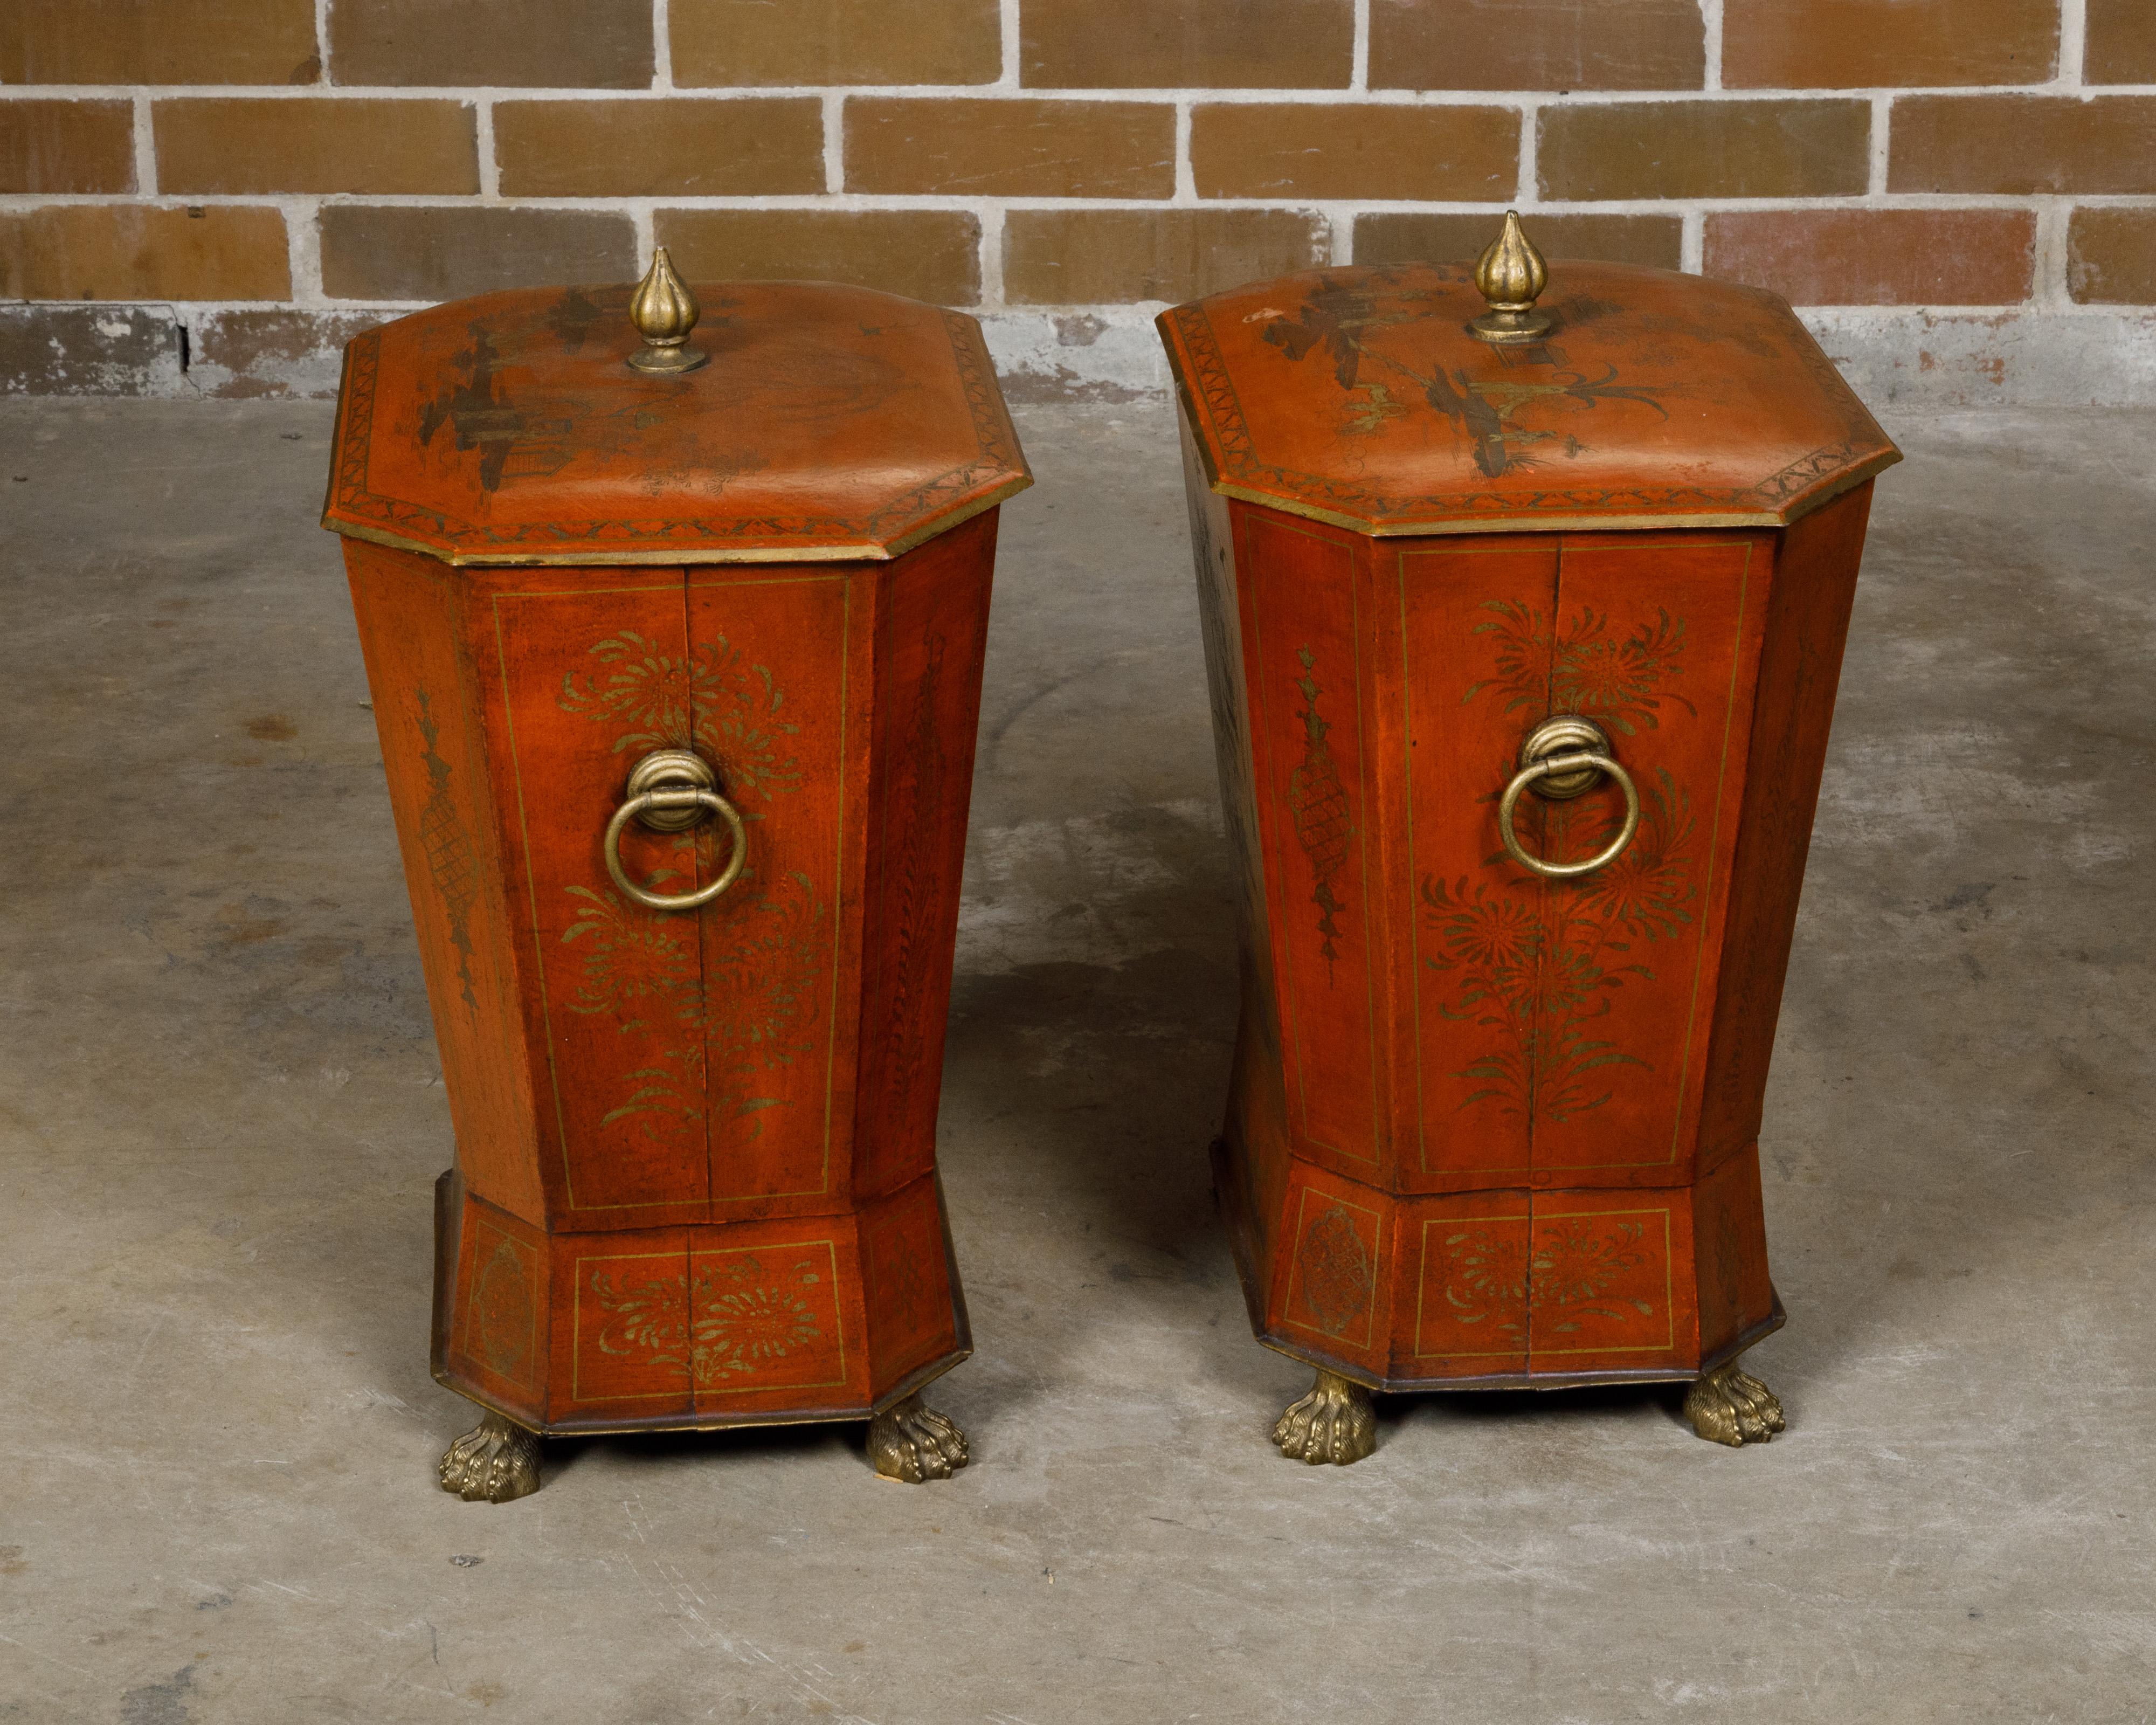 Pair of English Victorian 19th Century Red Lacquer Cellarettes with Chinoiseries For Sale 6